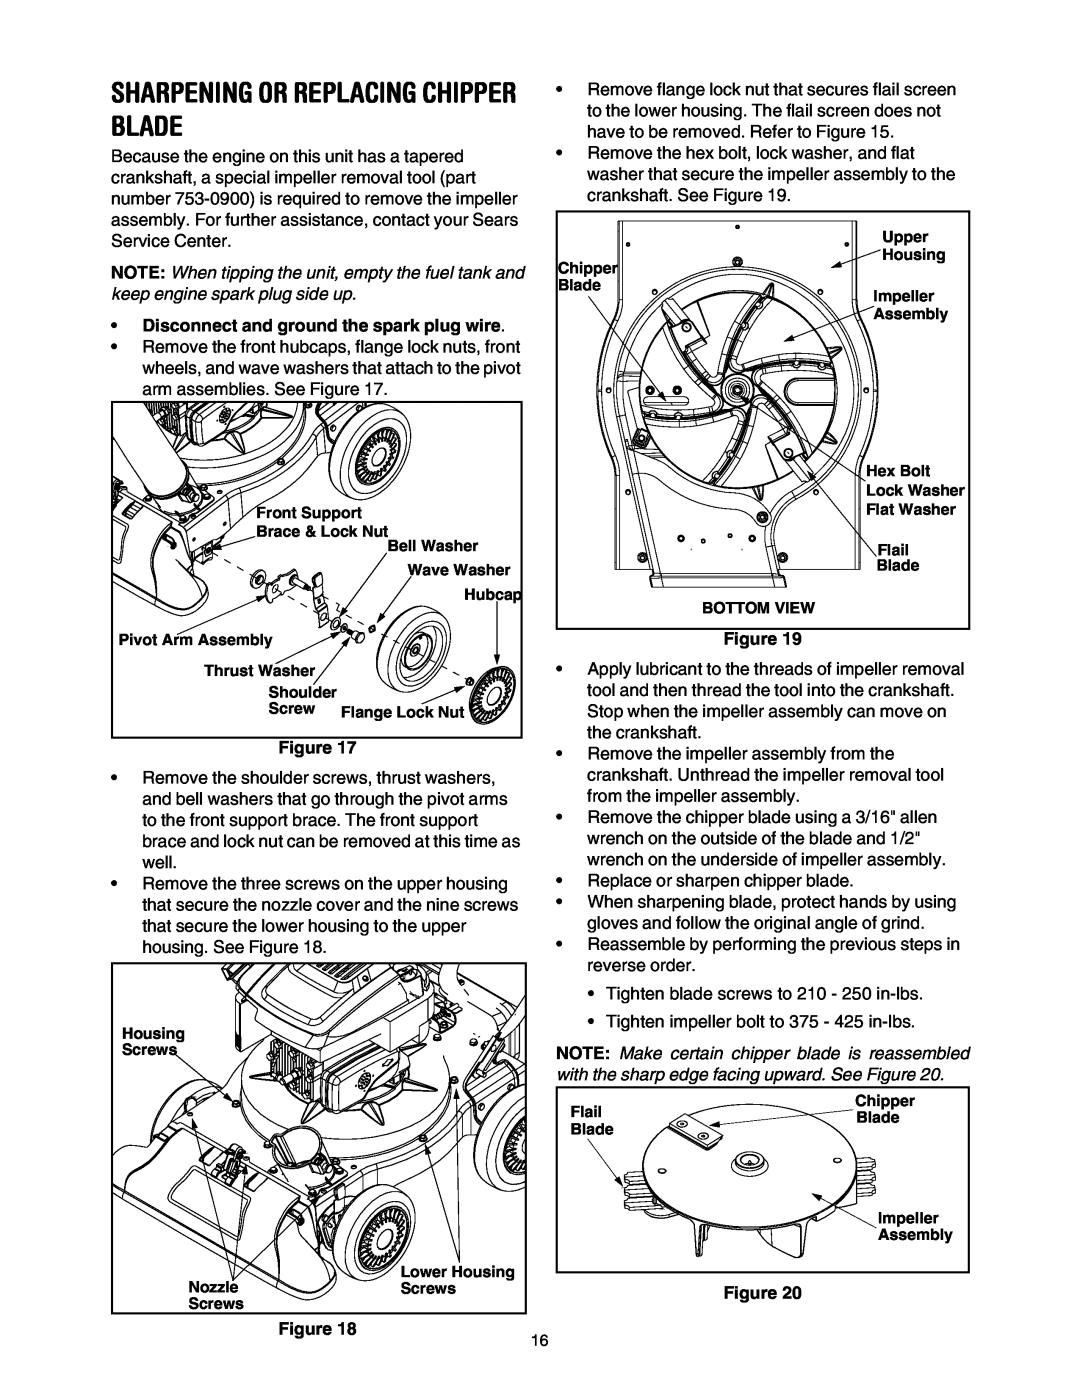 Sears 247.77055 operating instructions Sharpening Or Replacing Chipper Blade, Disconnect and ground the spark plug wire 